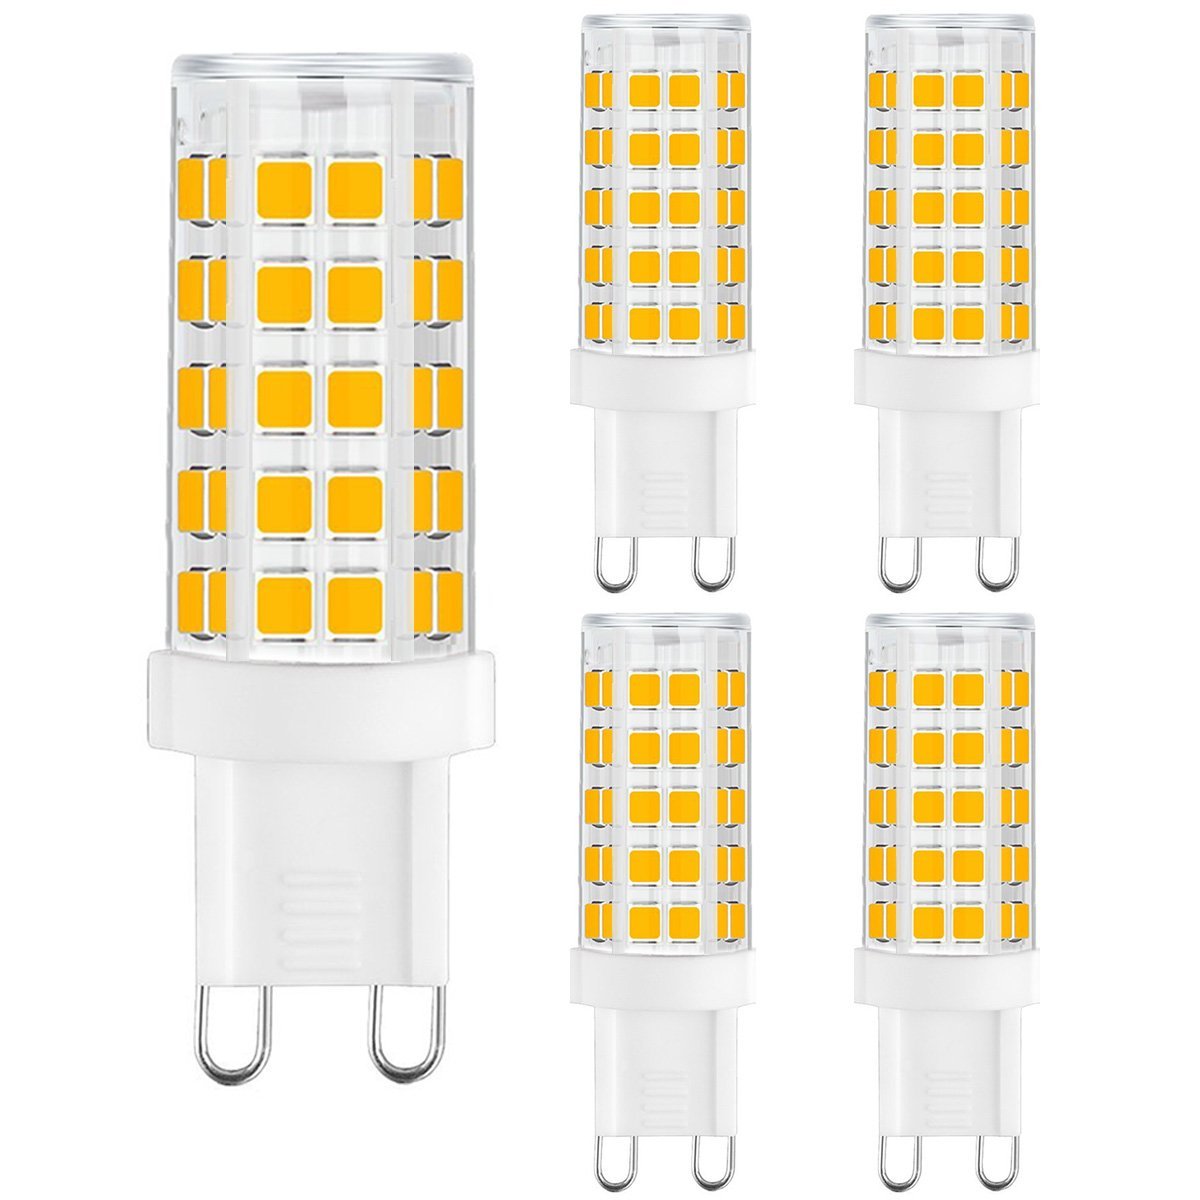 110V 120V 3000K Warm White Ampoule G9 LED Lamp Non Dimmable Corn Bulb with Ceramic Base G9 LED Light Bulb 6 Pack 5W Replacement Bulb for Halogen Crystal Chandelier Bulbs 40W Equivalent